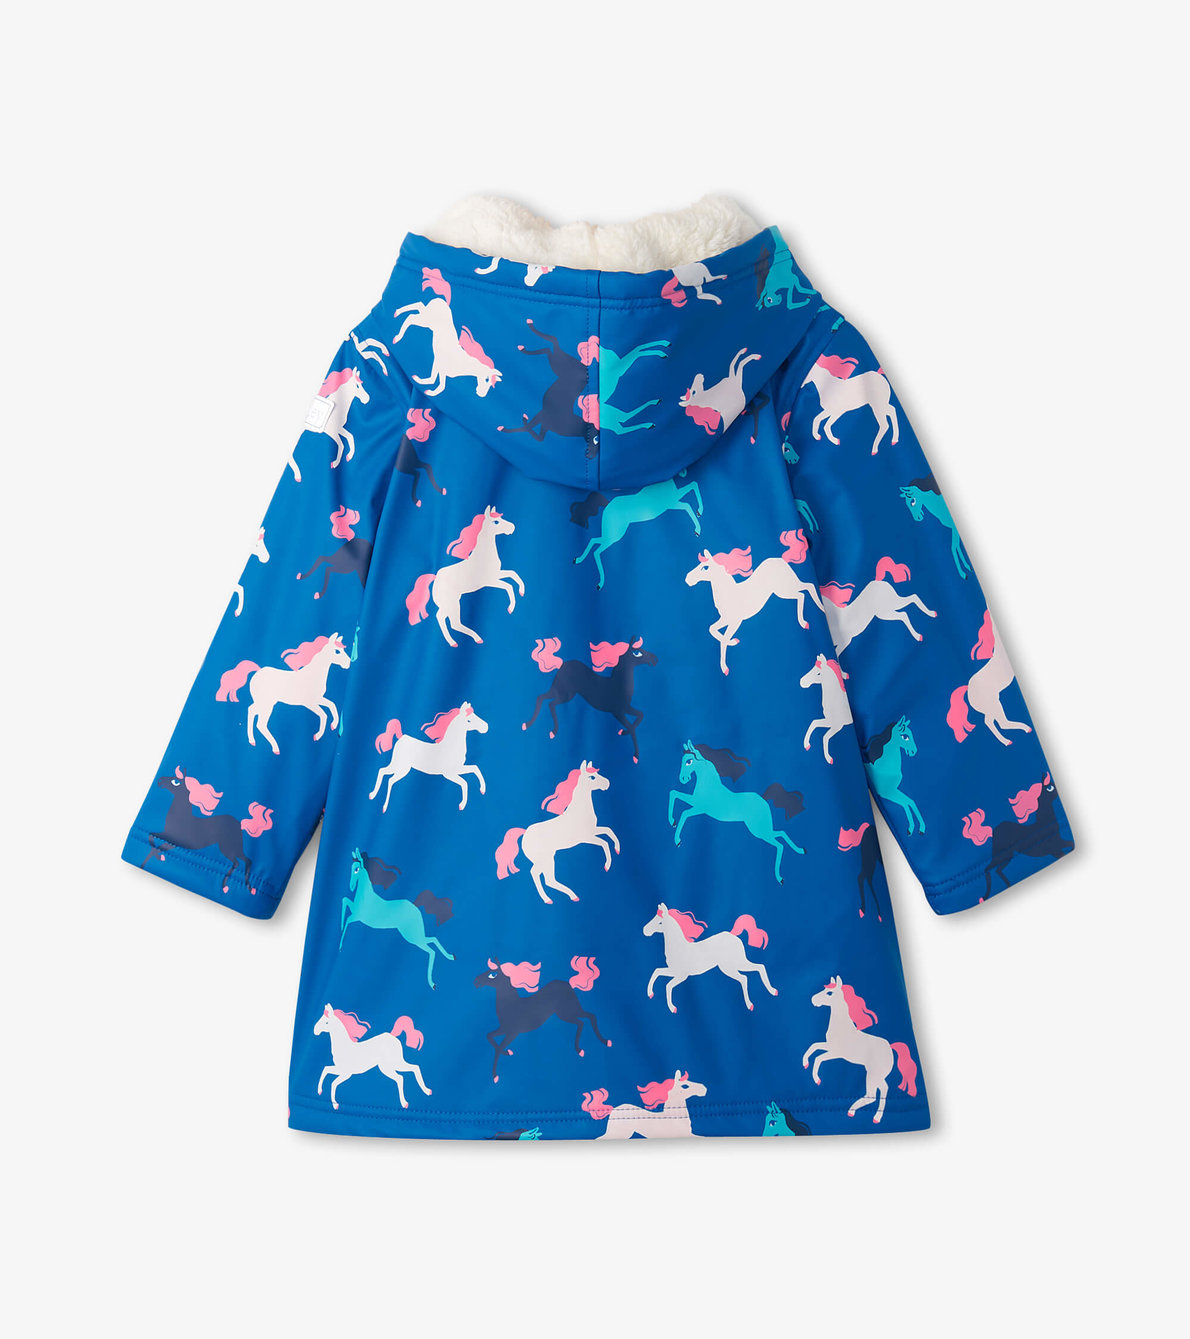 View larger image of Girls Prancing Horses Colour Changing Sherpa Lined Button-Up Rain Jacket